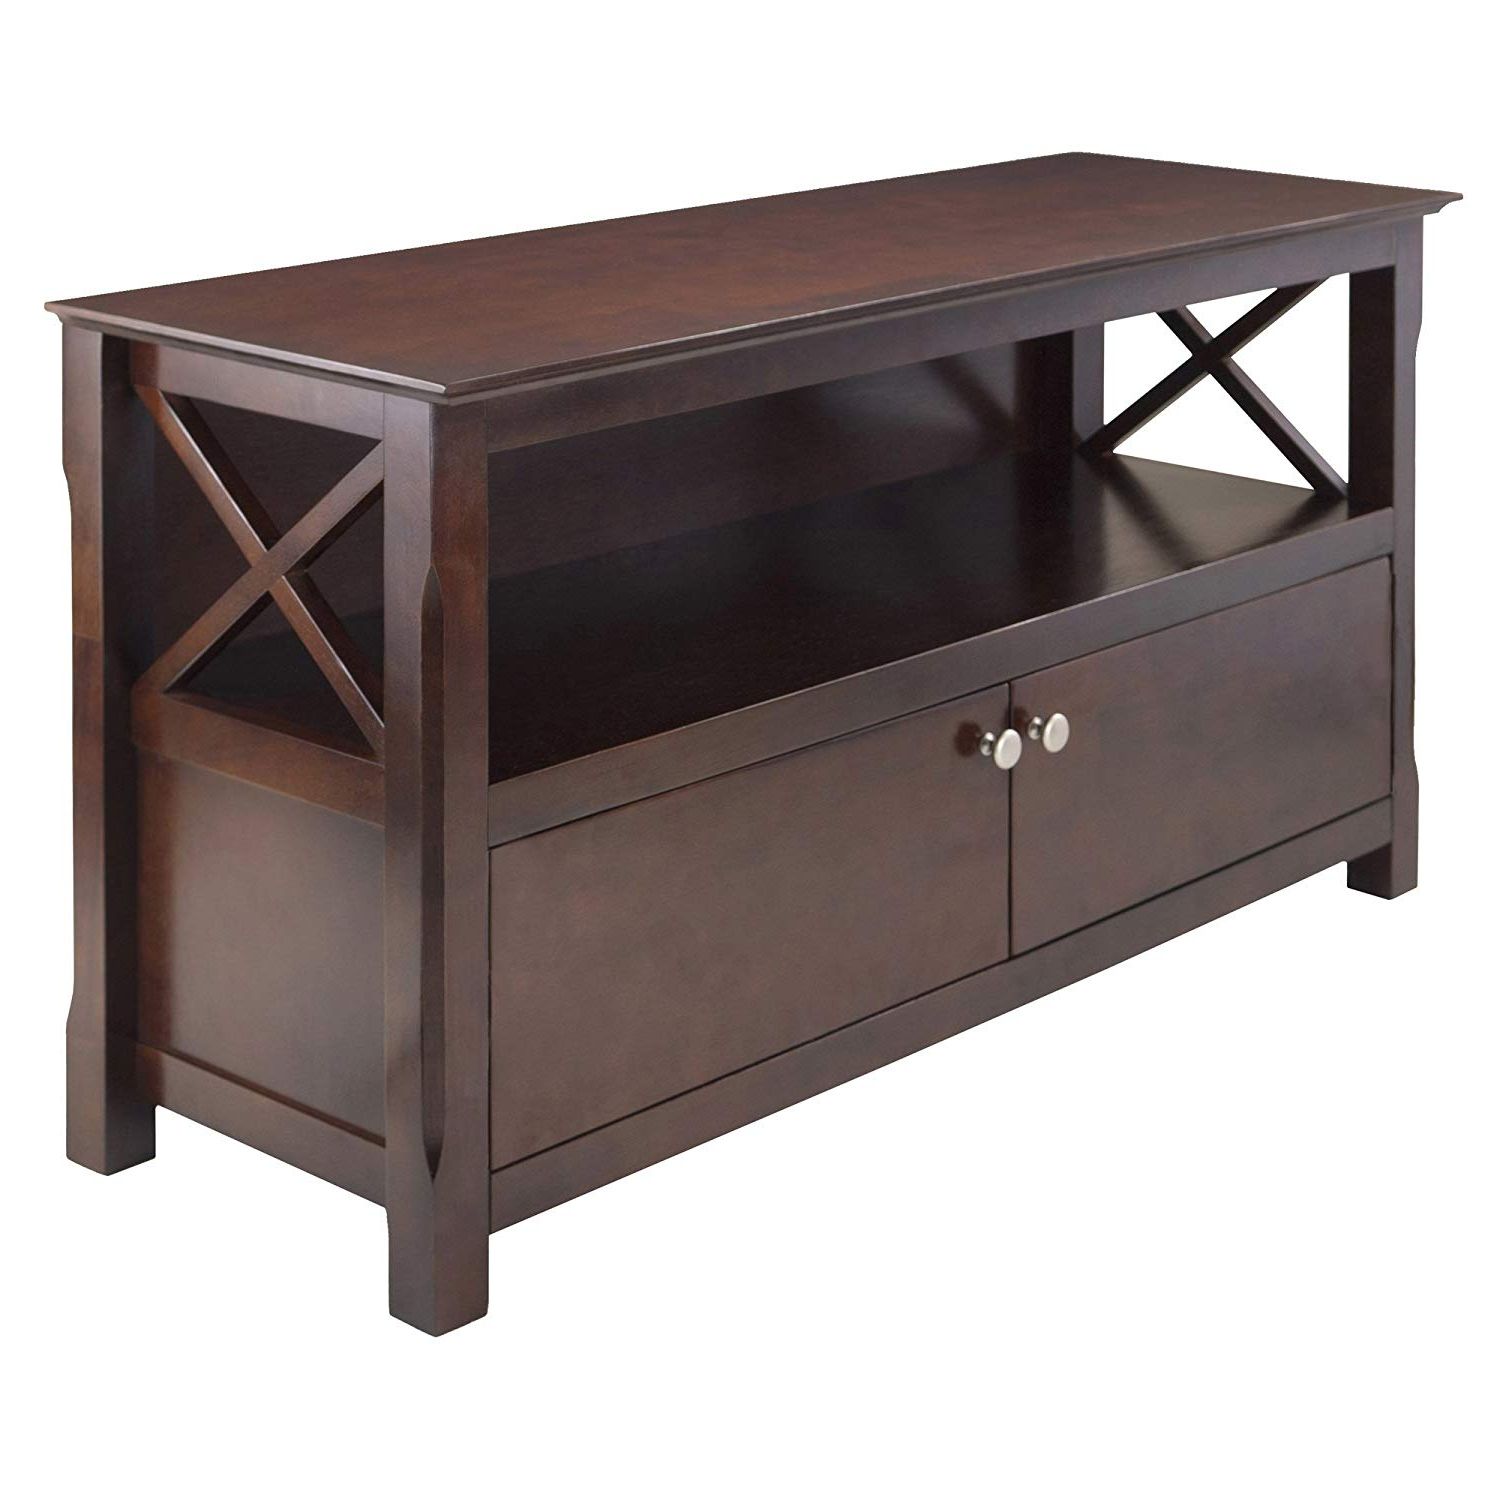 Country Style Tv Cabinets Pertaining To Most Recently Released Amazon: Winsome Wood Xola Tv Stand: Kitchen & Dining (View 14 of 20)